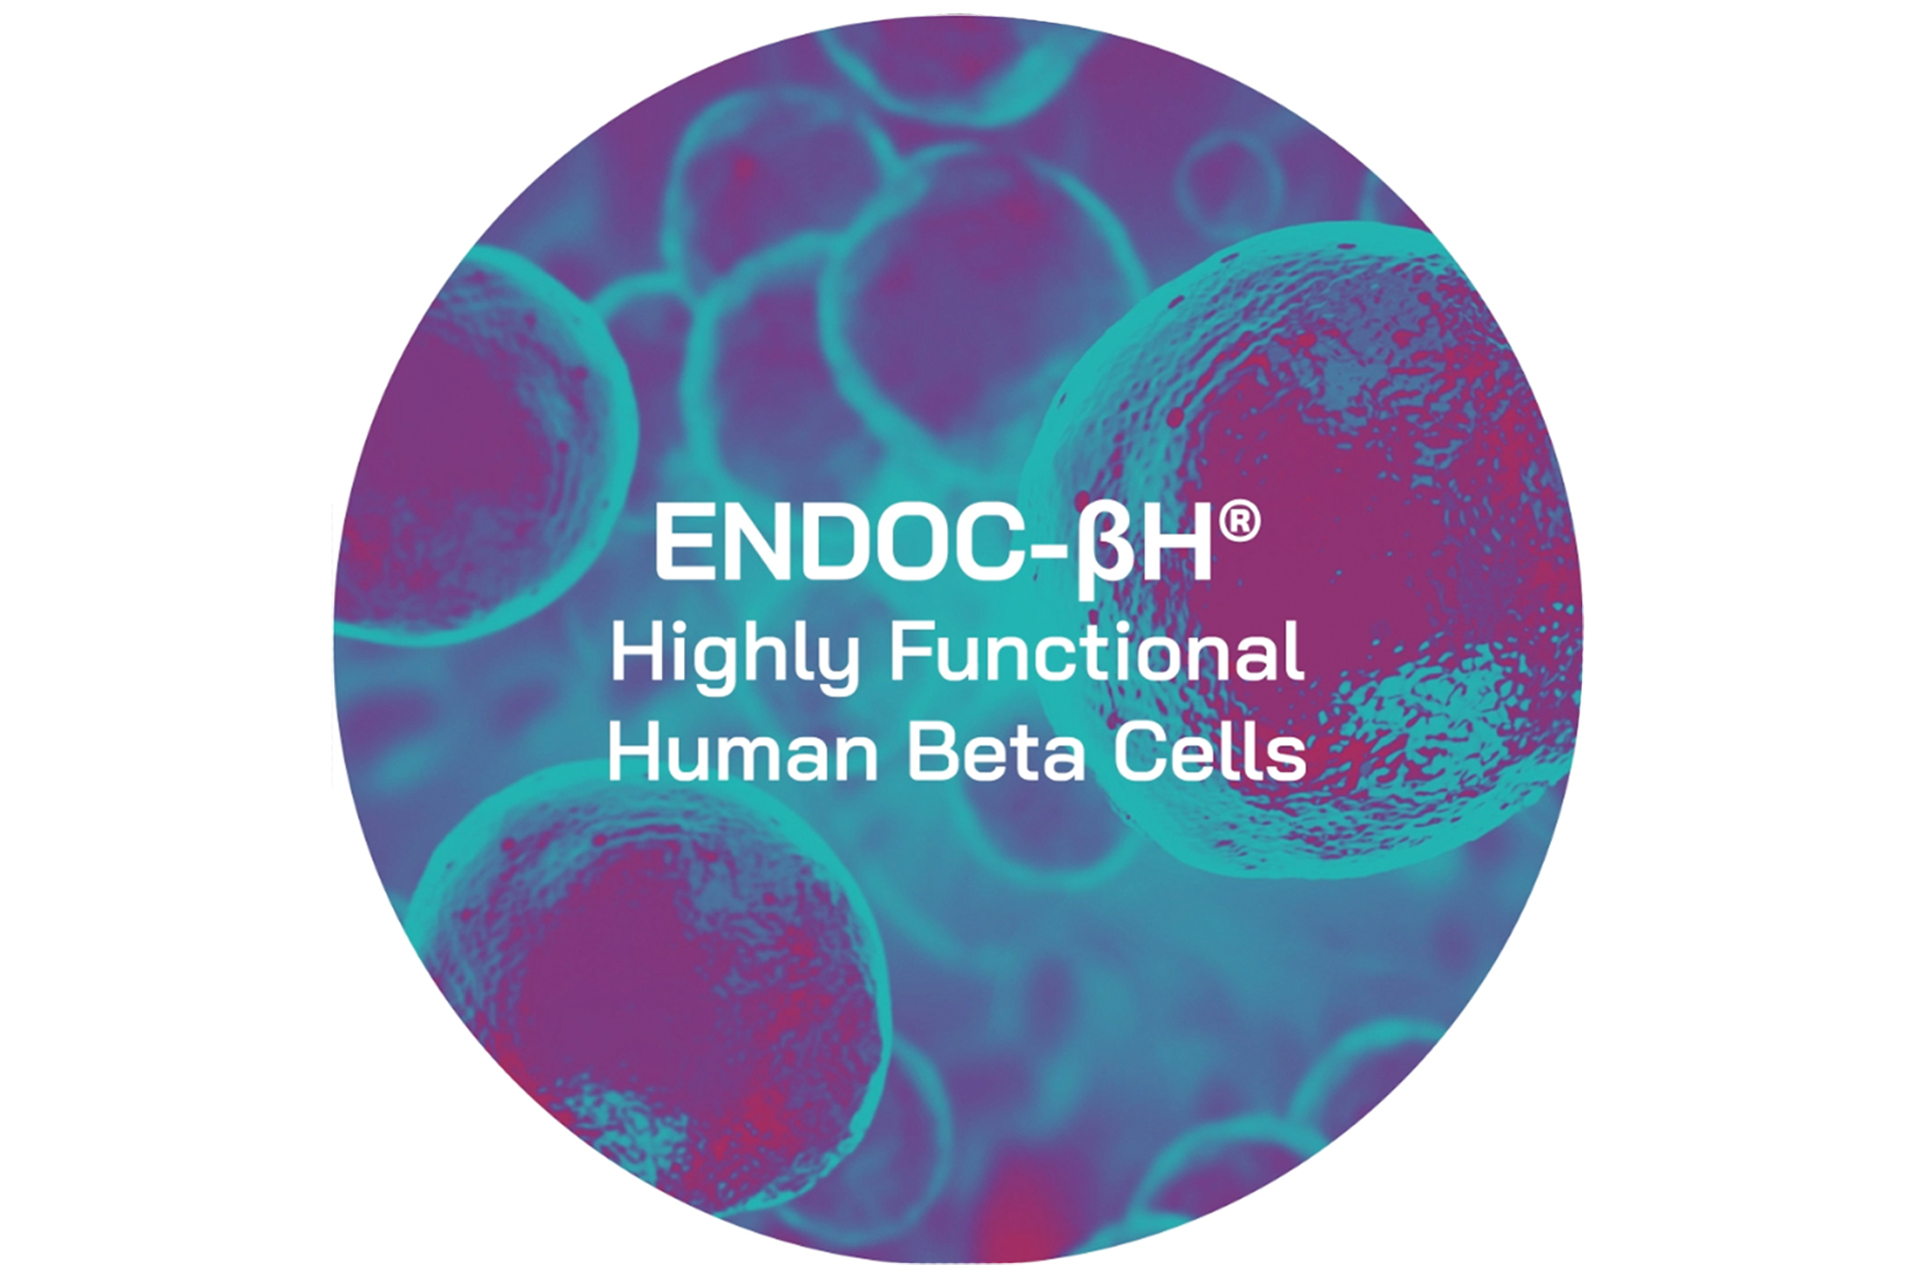 news-human-cell-design-new-endoc-bh5-human-beta-cells-100-pure-and-standardized-population